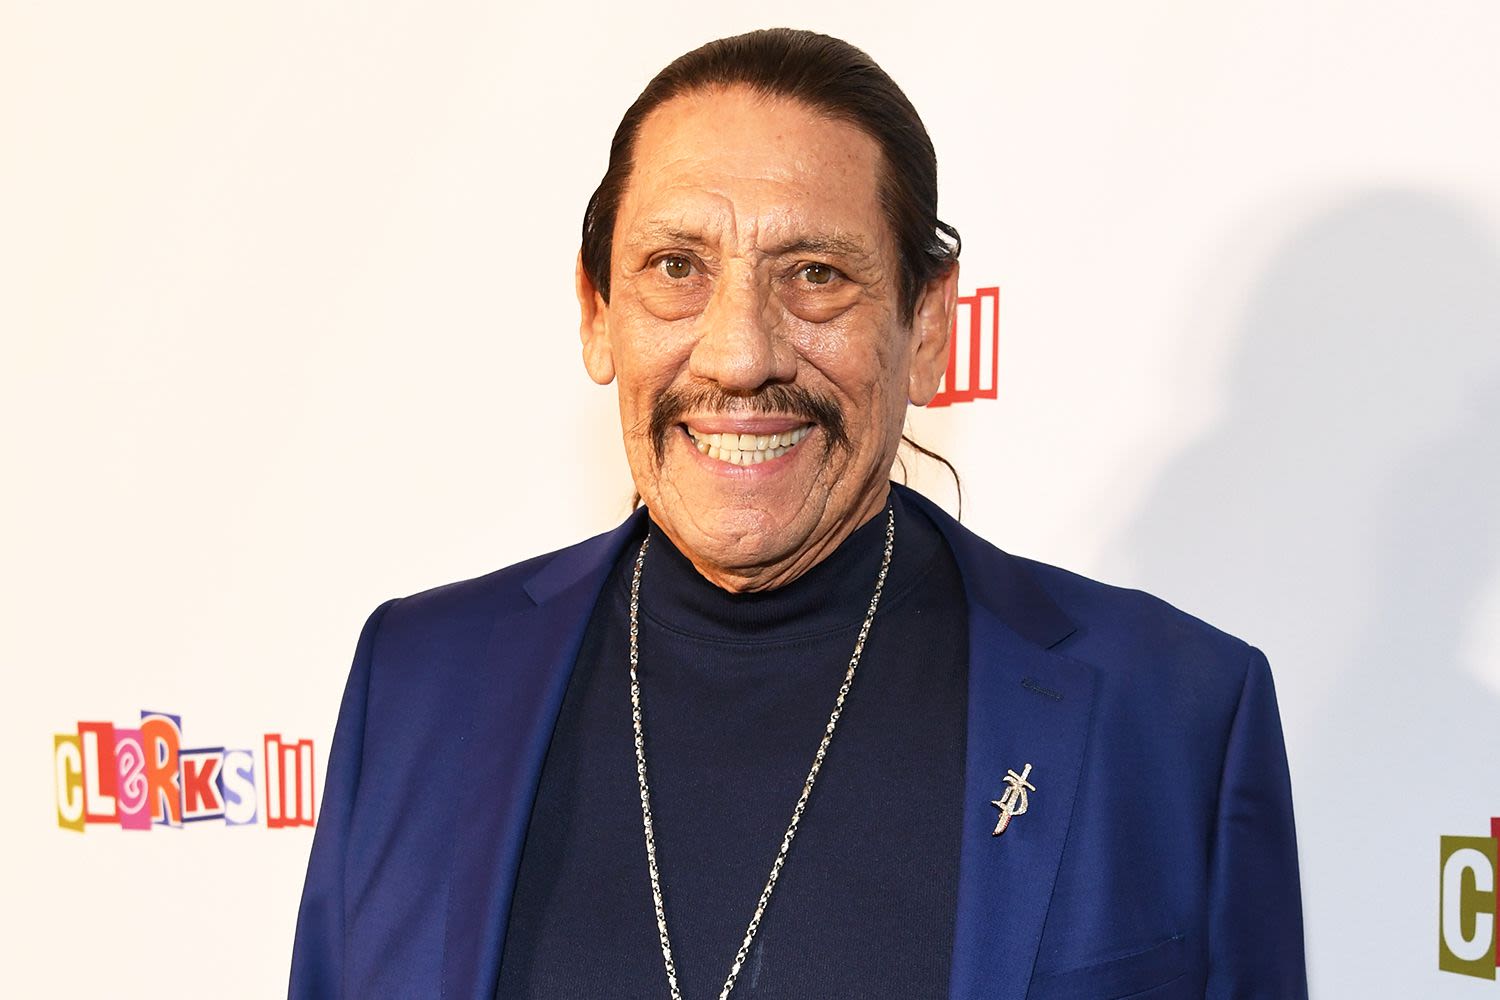 Danny Trejo, 80, Throws a Chair, Gets Knocked to Ground During Fight with Crowd at Fourth of July Parade